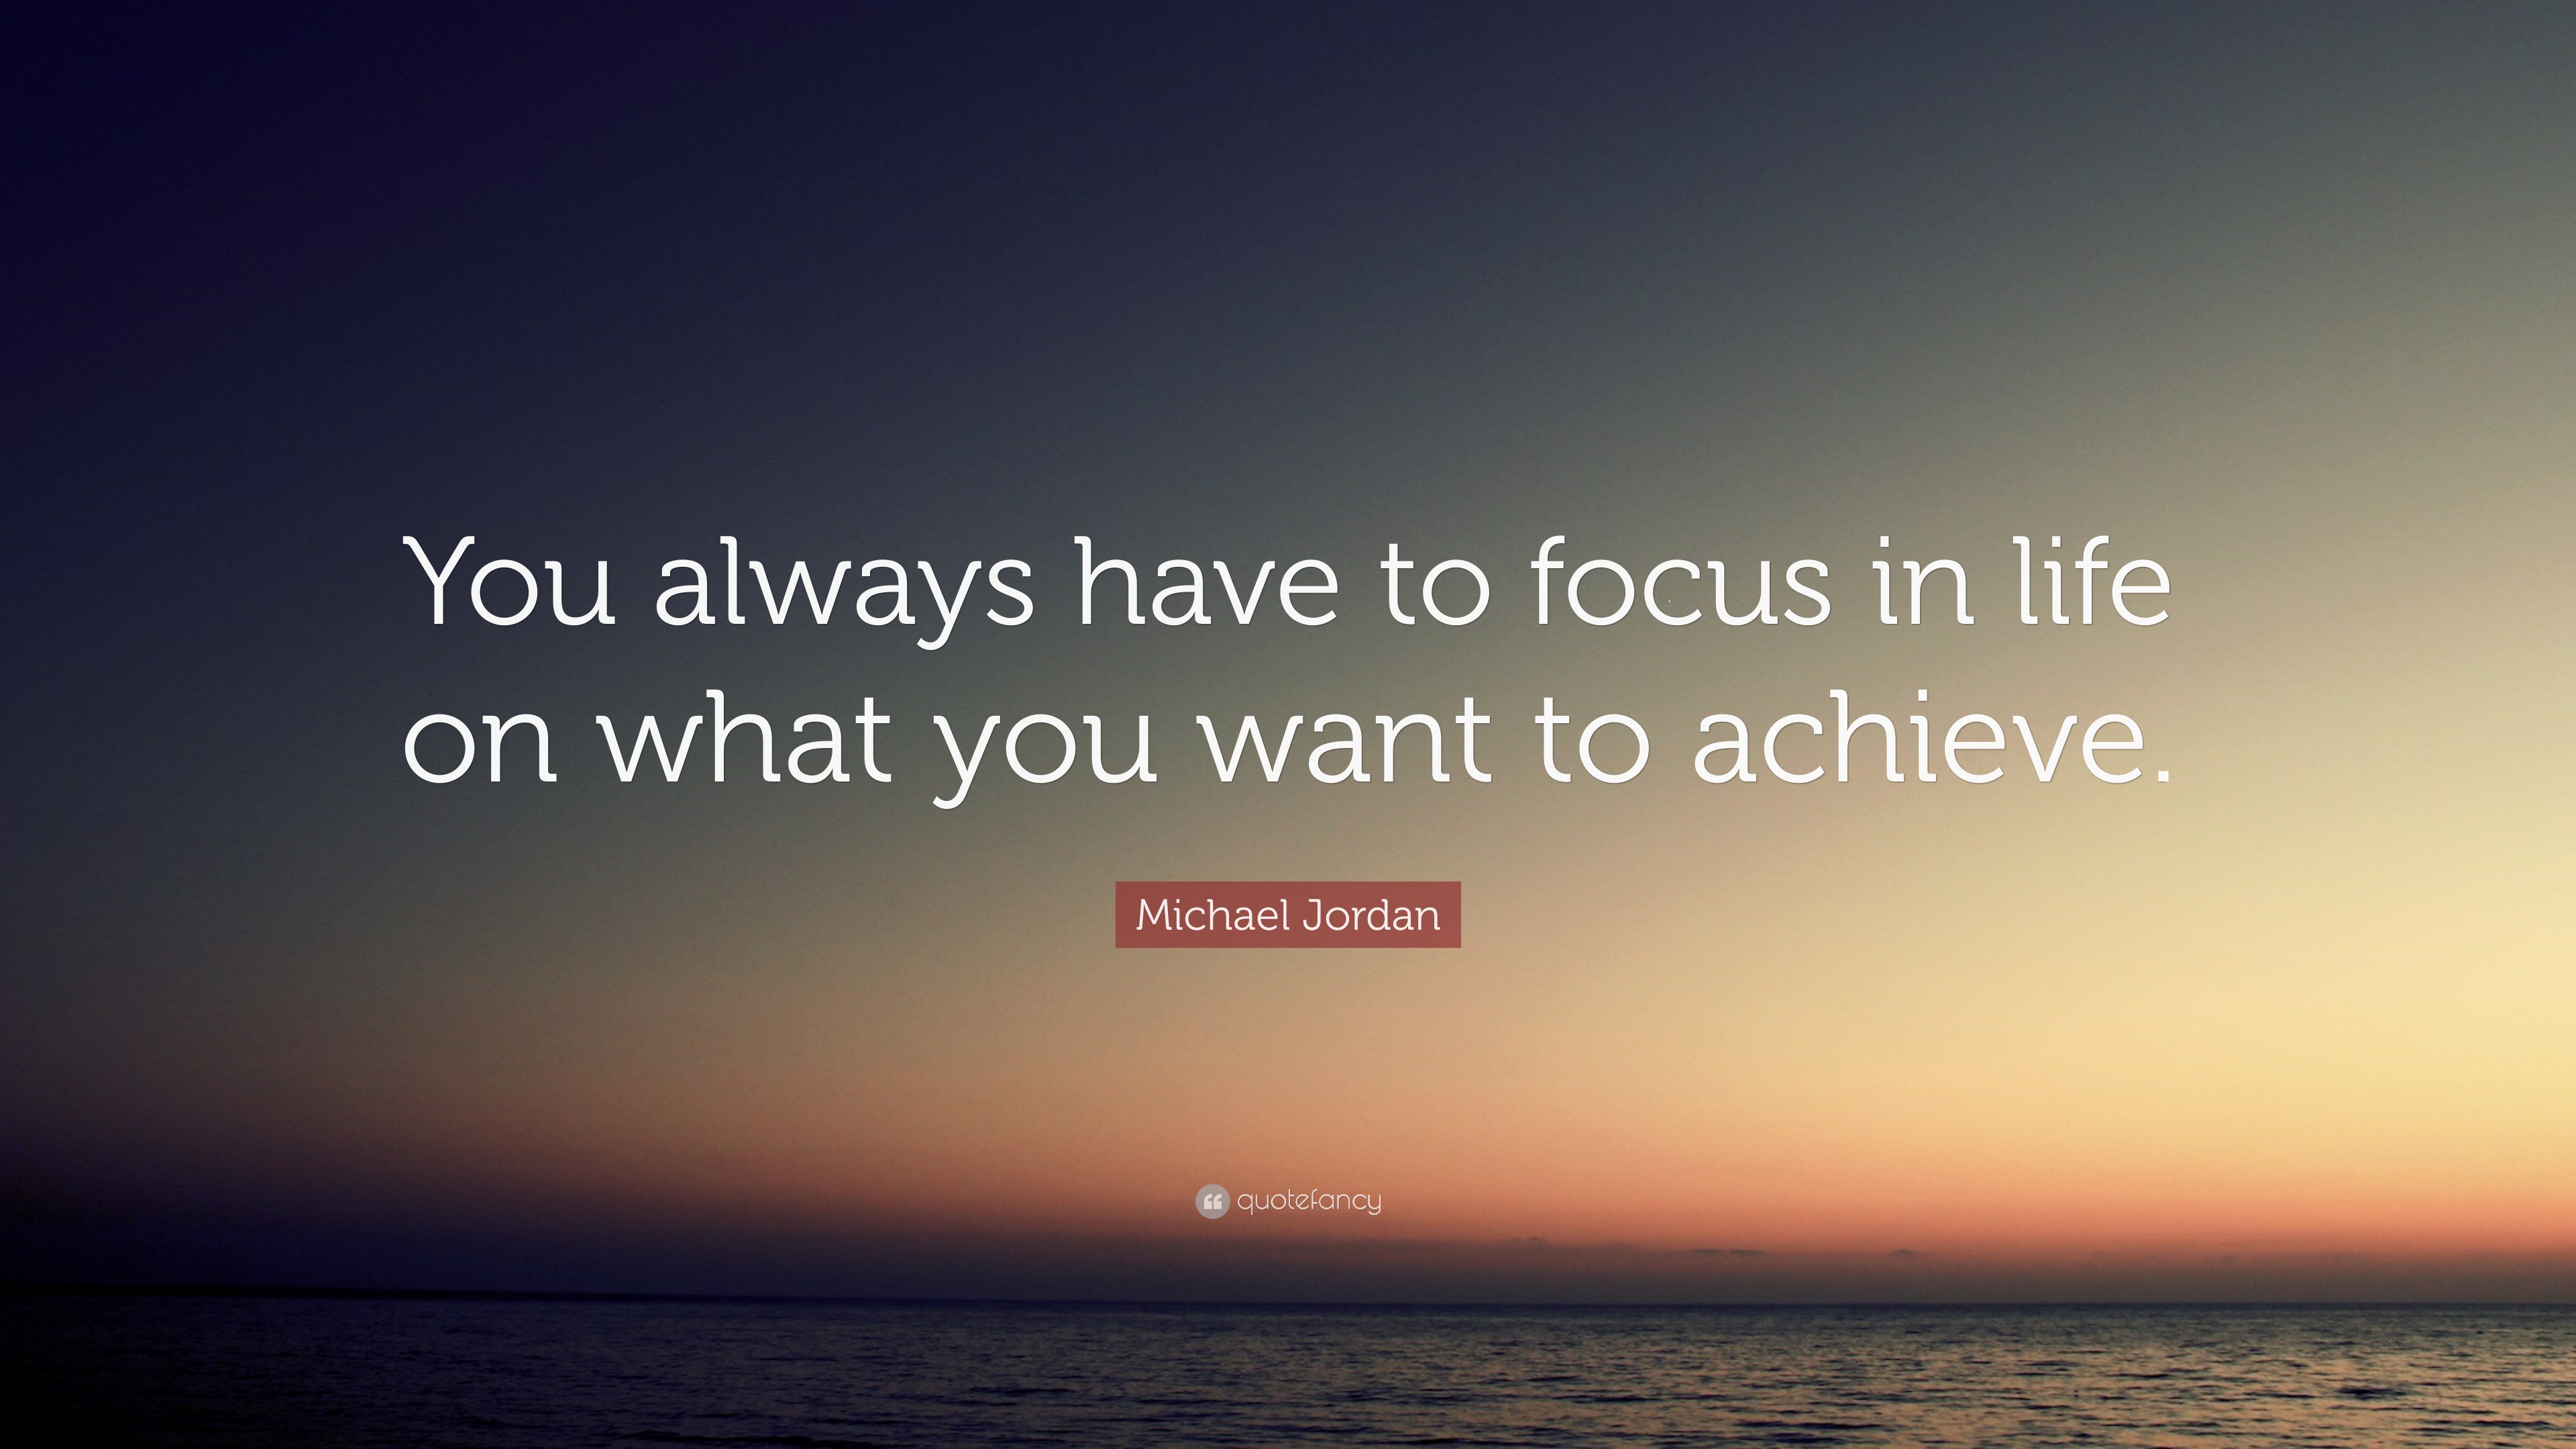 Michael Jordan Quote: “You always have to focus in life on what you